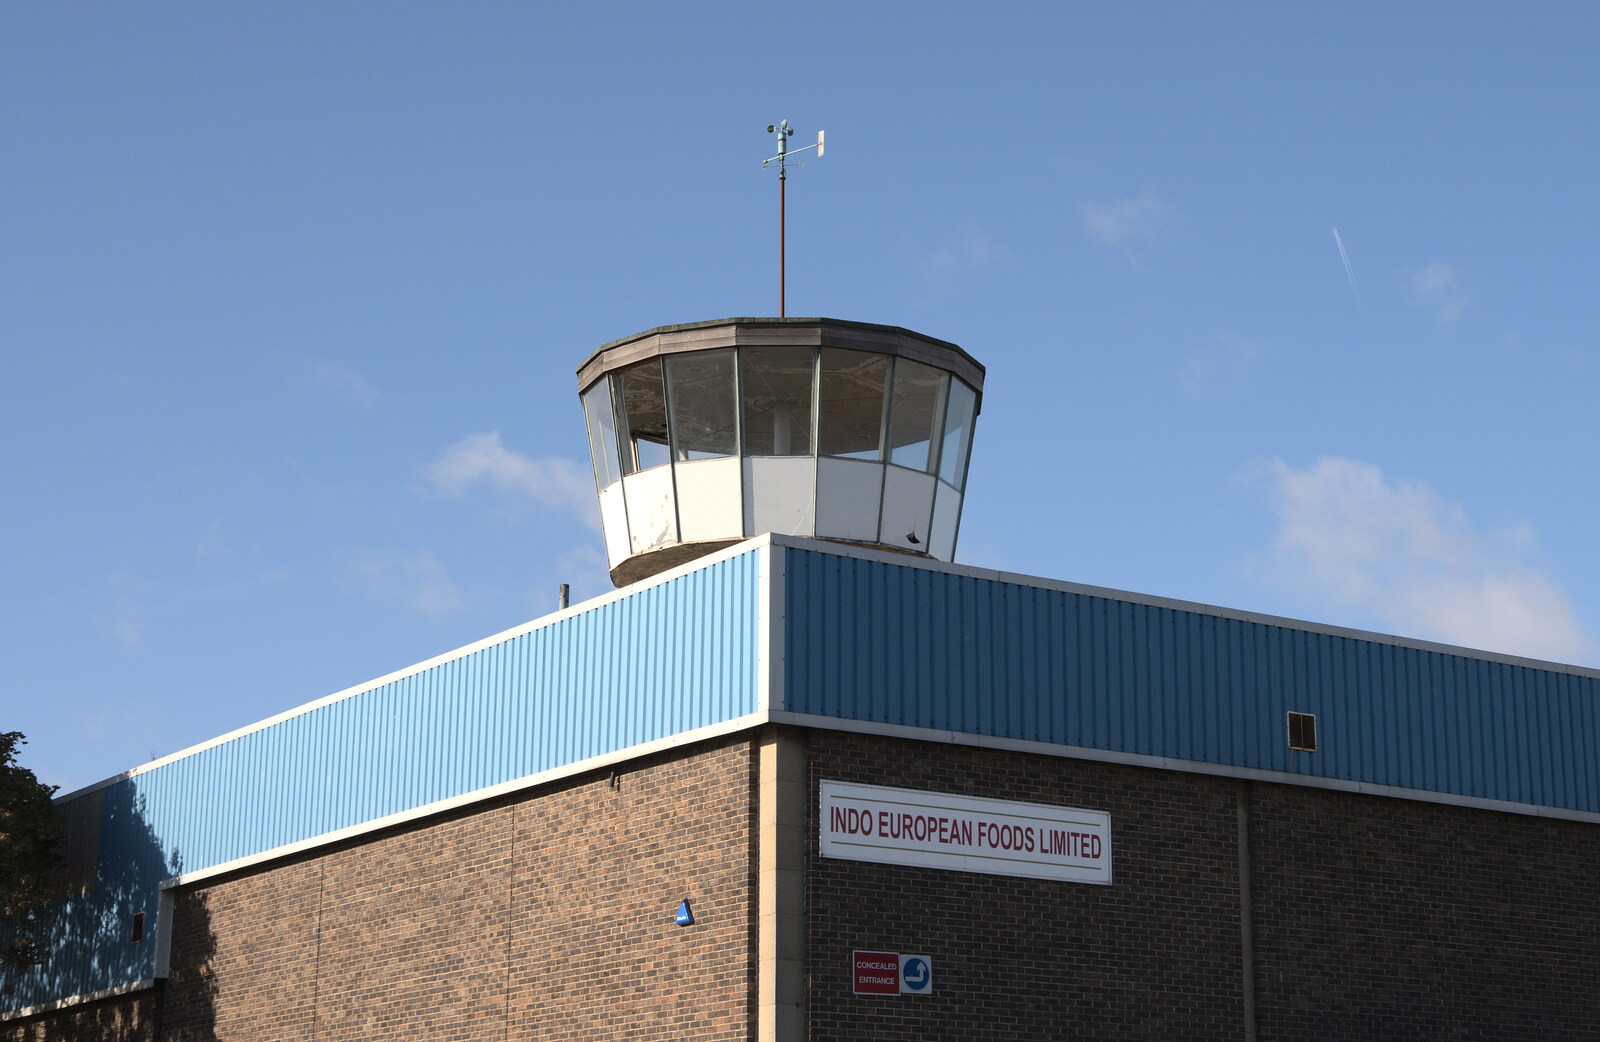 A Postcard from Felixstowe, Suffolk - 5th October 2022: There's a control tower on a factory